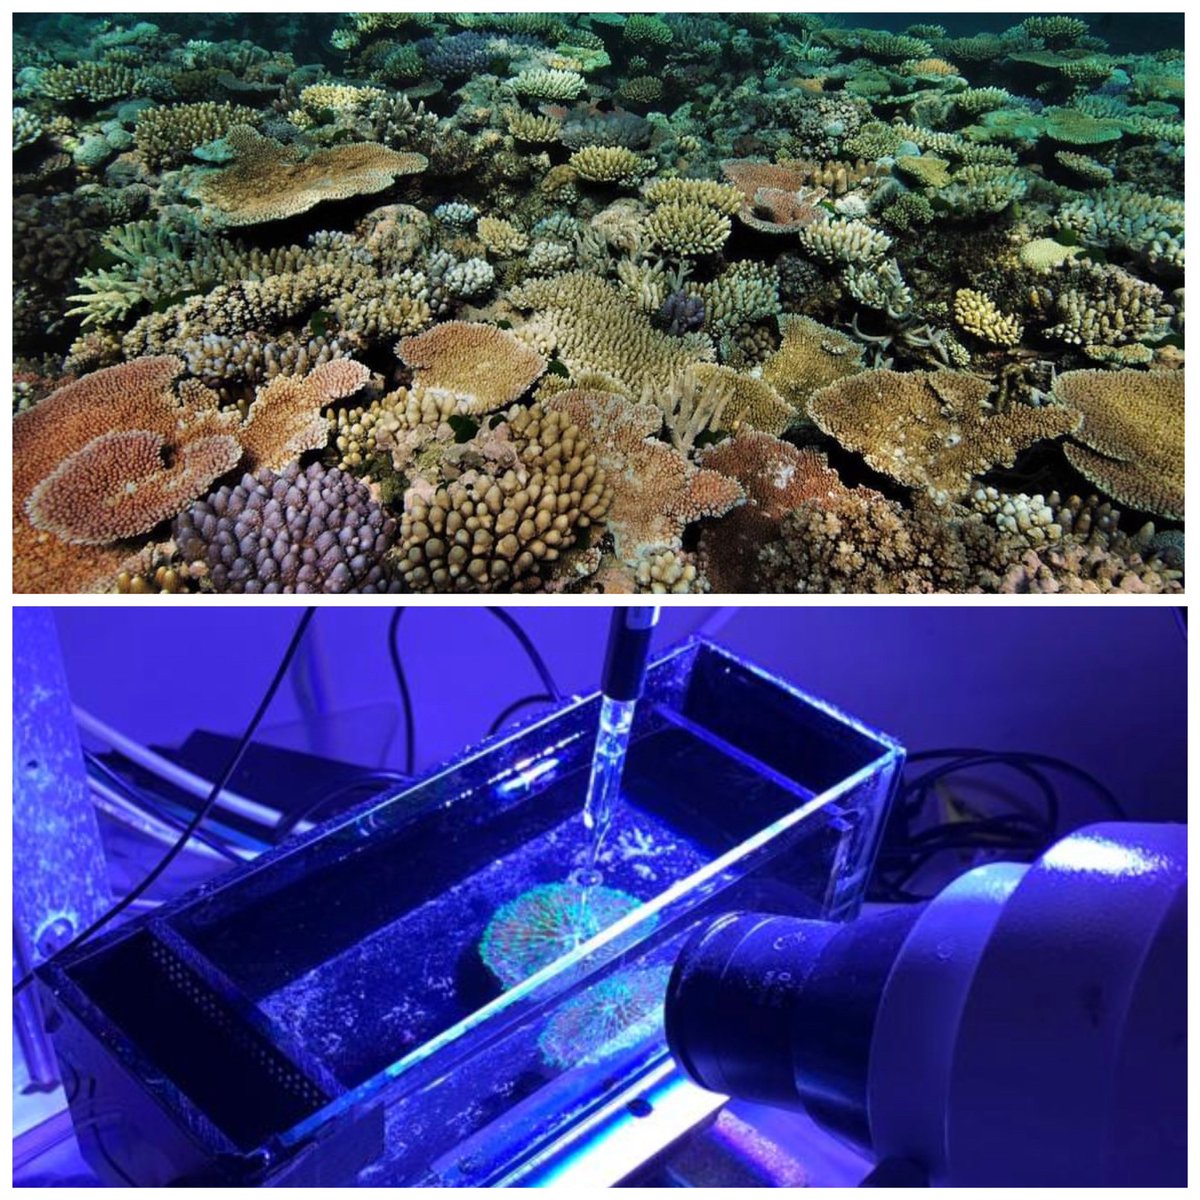 Can’t wait to get started on our #coral #deoxygenation project next year with @DavidJSuggett @MicroSensing @DrCarlyRandall @reefgenomics & M. Pernice #DP23 #ARC. We will be hiring a postdoc, more info soon but please DM if interested. 🪸💙🪸